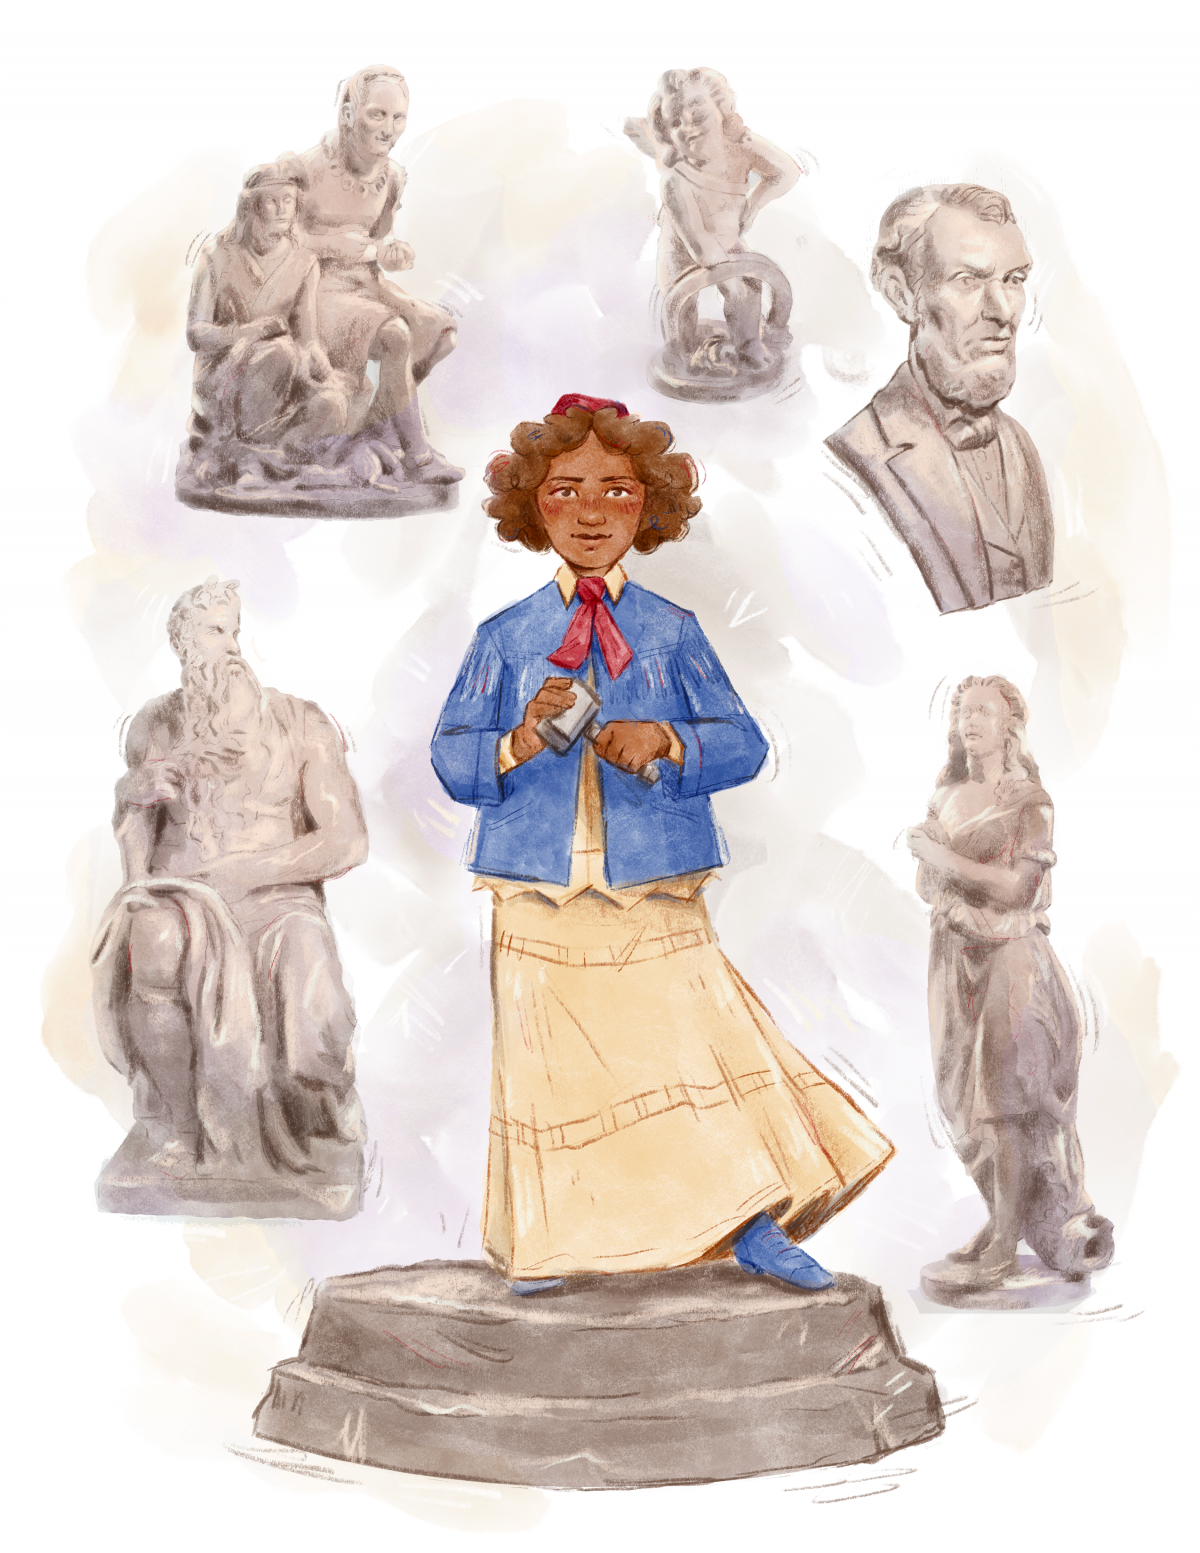 An illustration of a young Edmonia Lewis standing on a pedastal, surrounded by her sculptures.